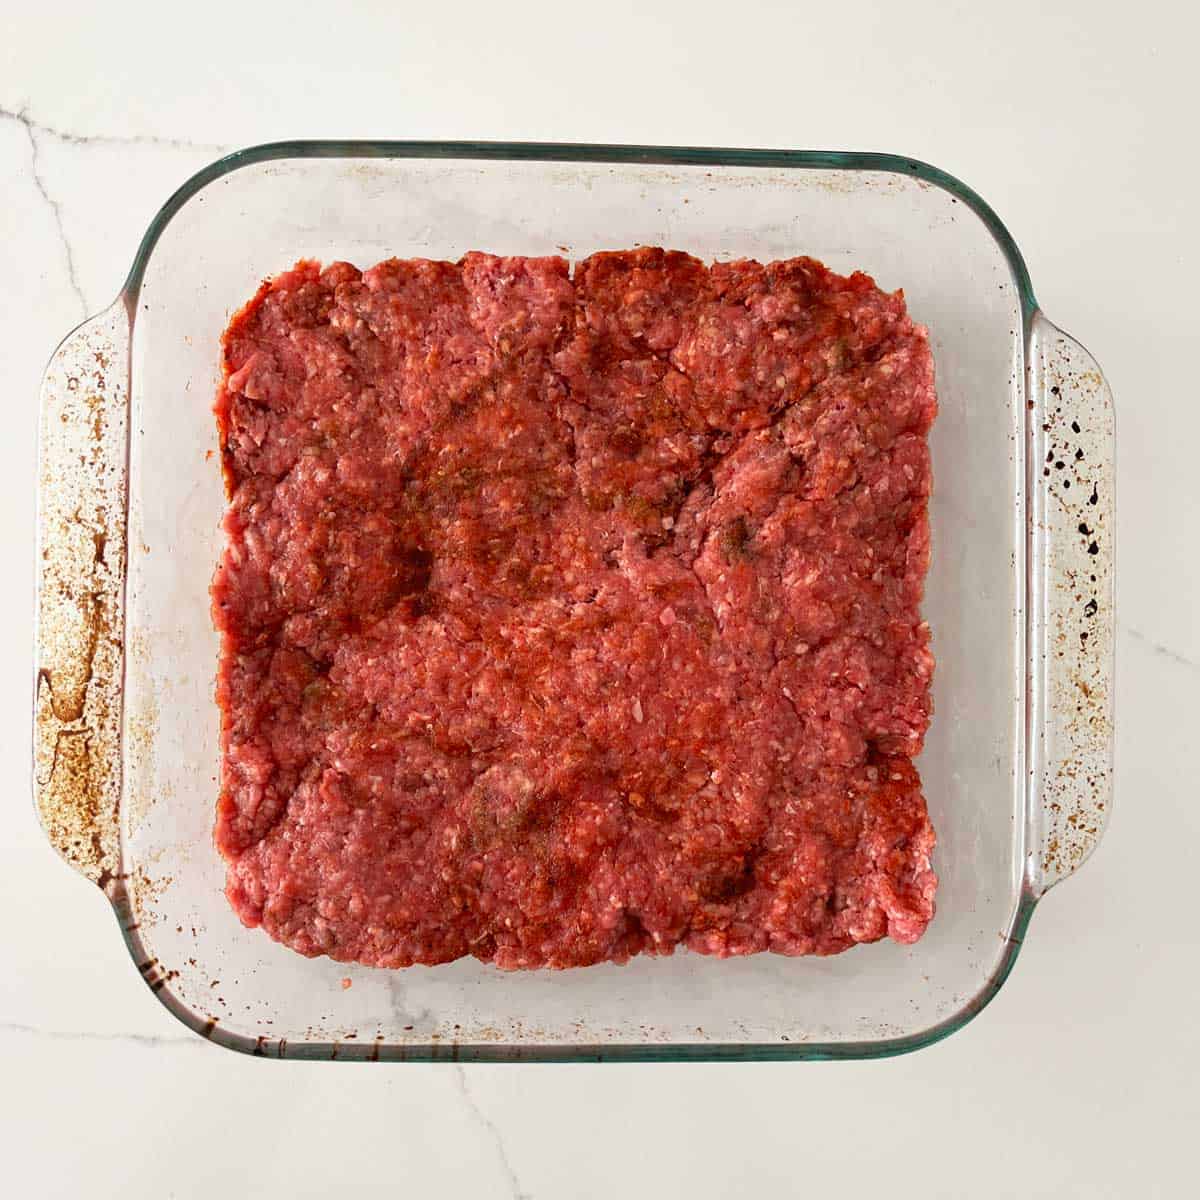 The beef mixture is in a square pan.